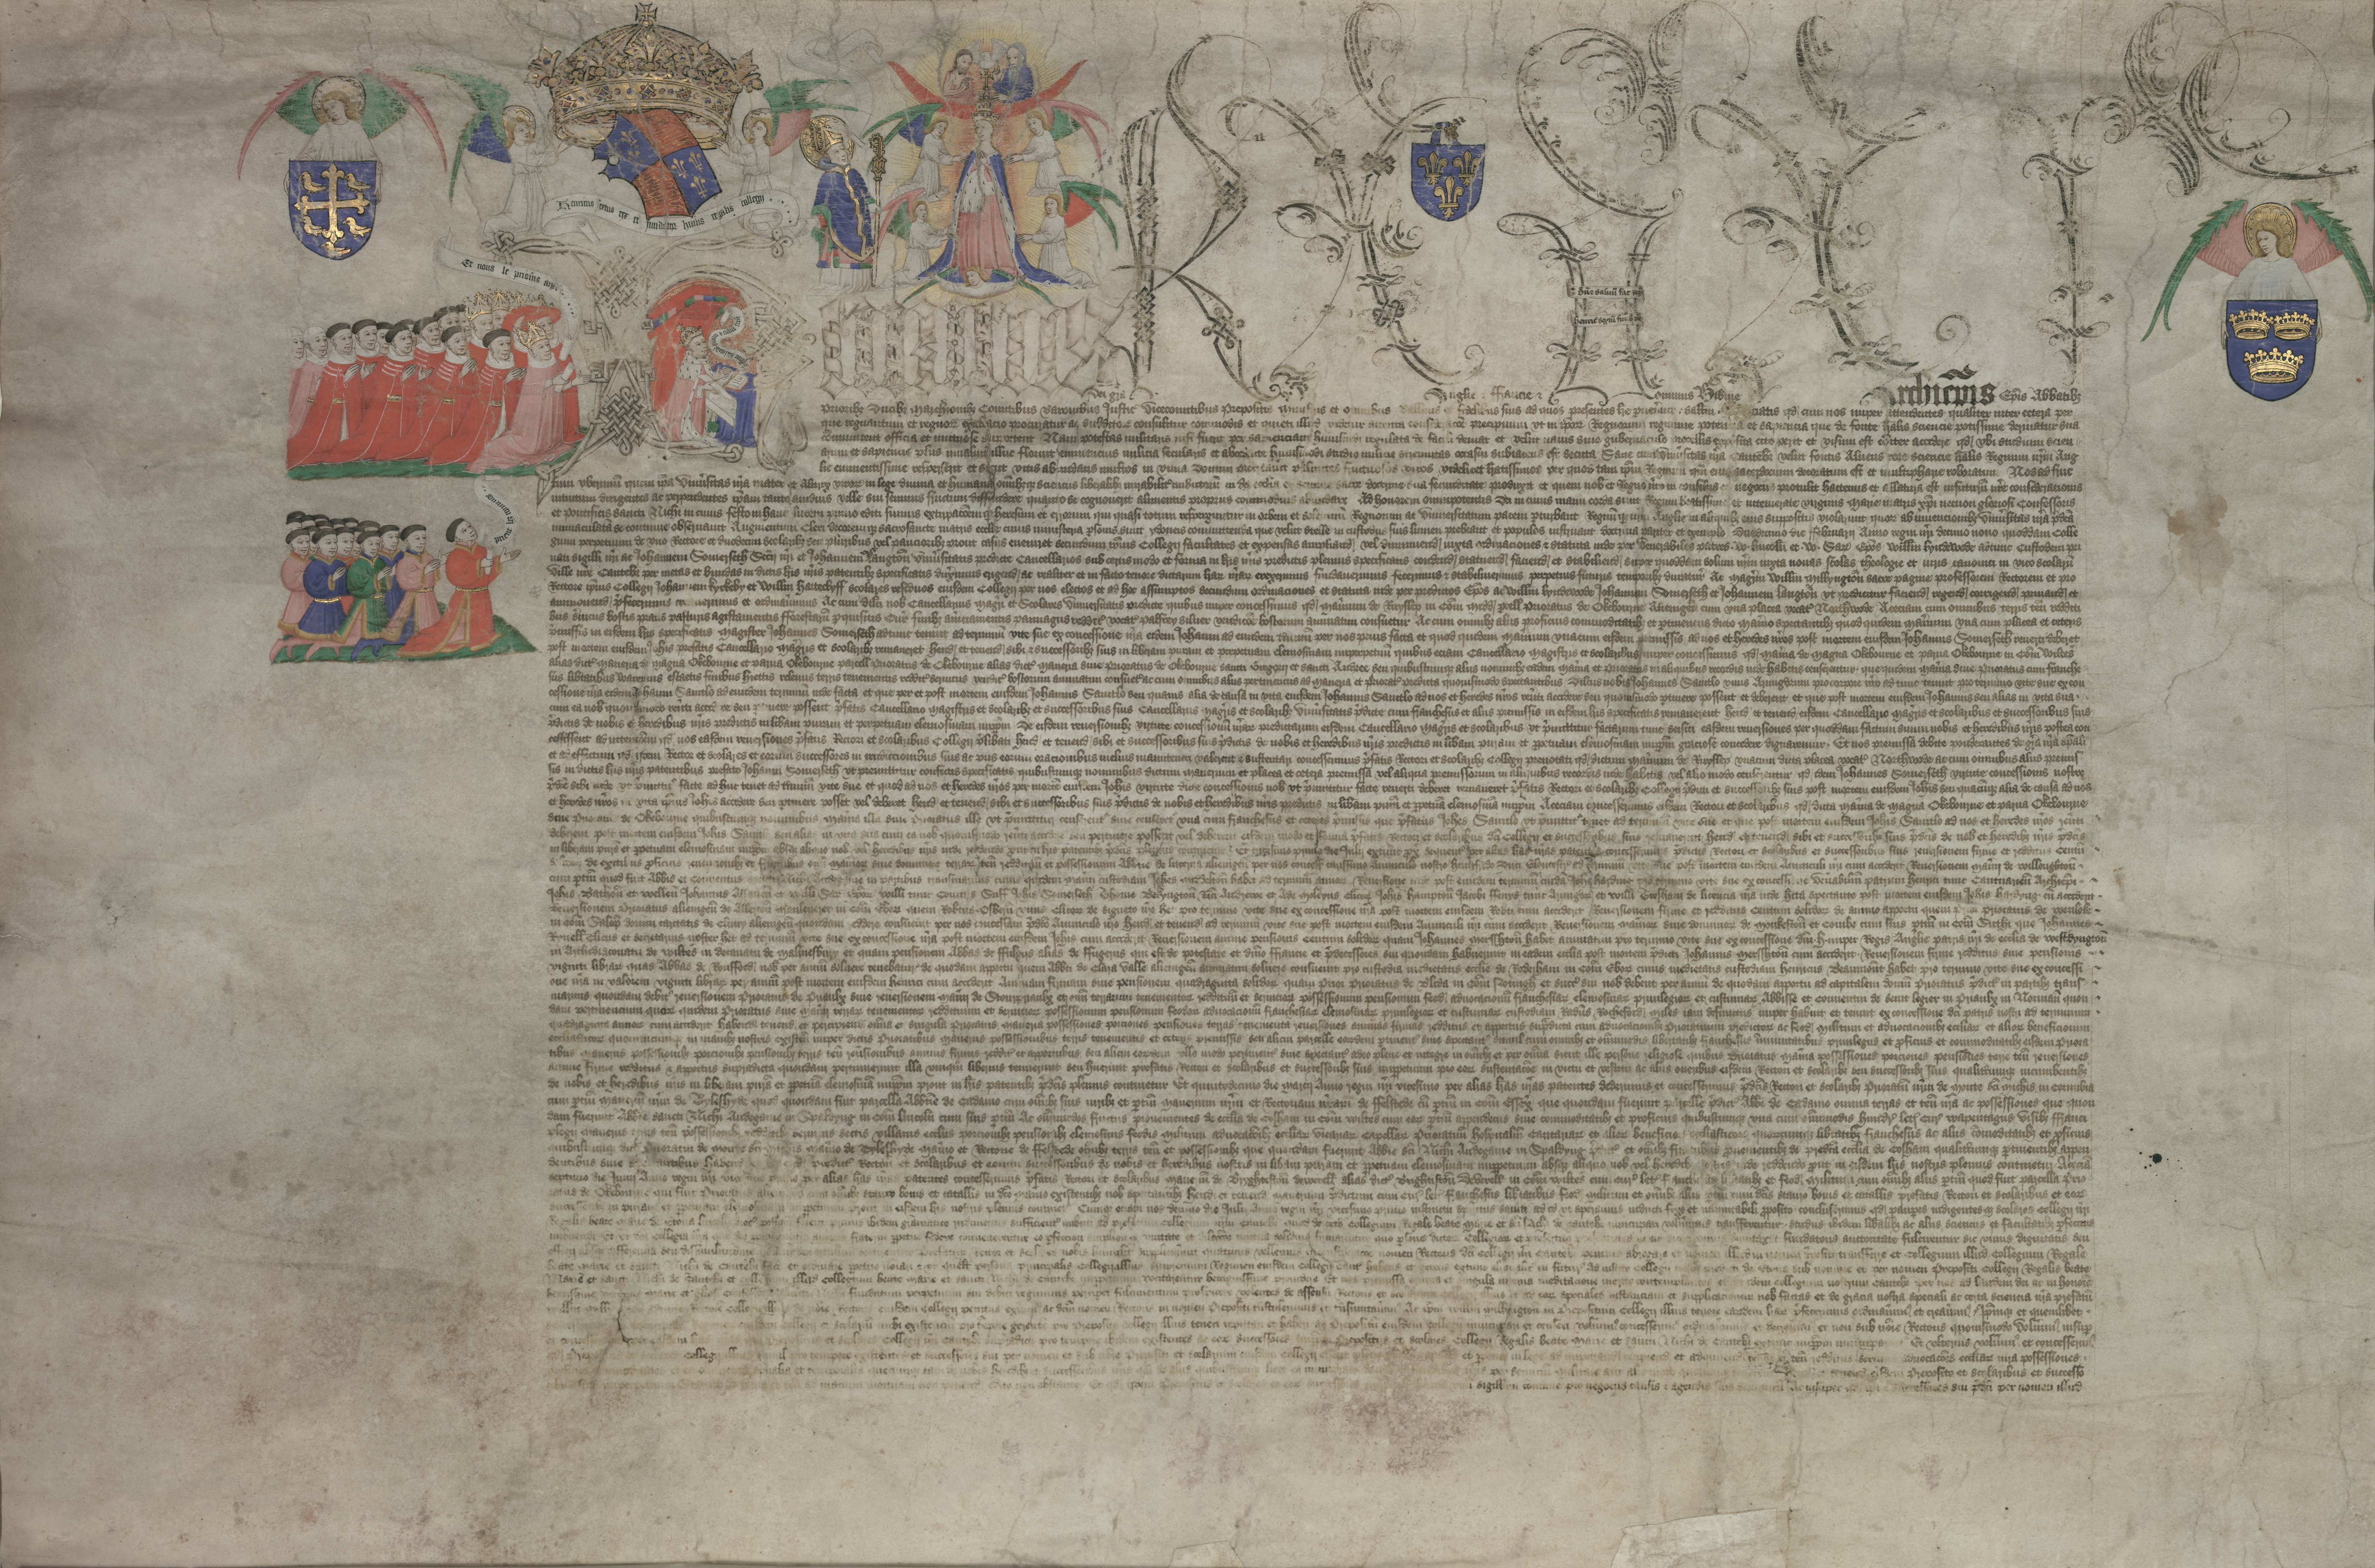 Endowment grant by Henry VI of lands and privileges to benefit his College of St. Nicholas and Our Lady (otherwise known as King’s College) at Cambridge, 1446. Photo by DIAMM. Archive Centre, King’s College, Cambridge.  KC/18